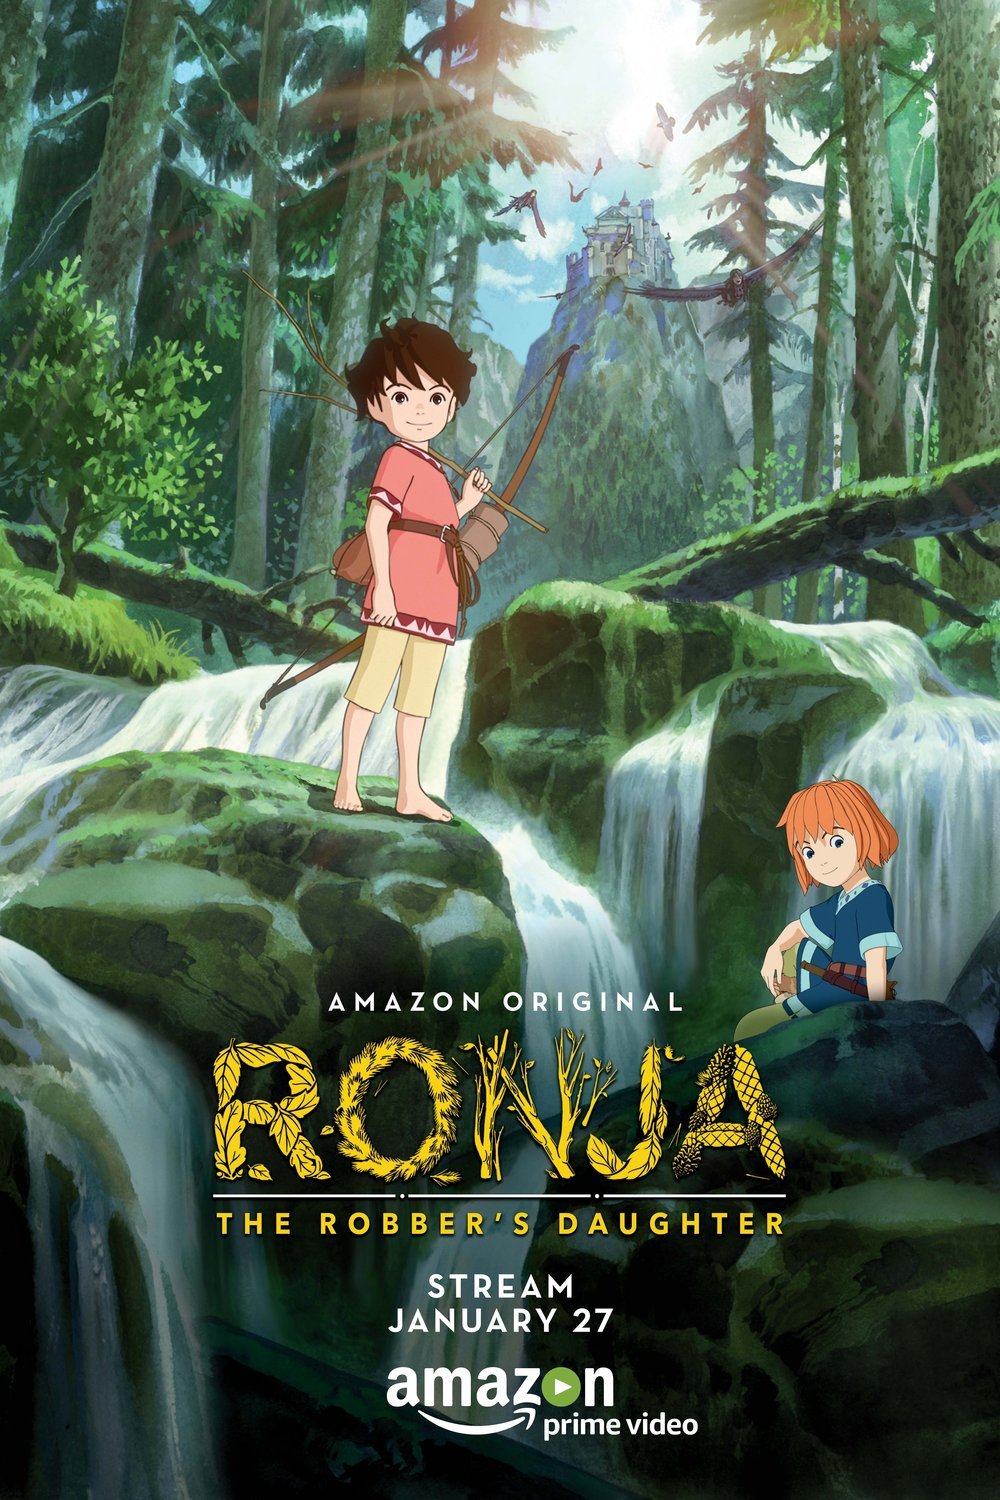 Poster of the movie Ronja, the Robber's Daughter